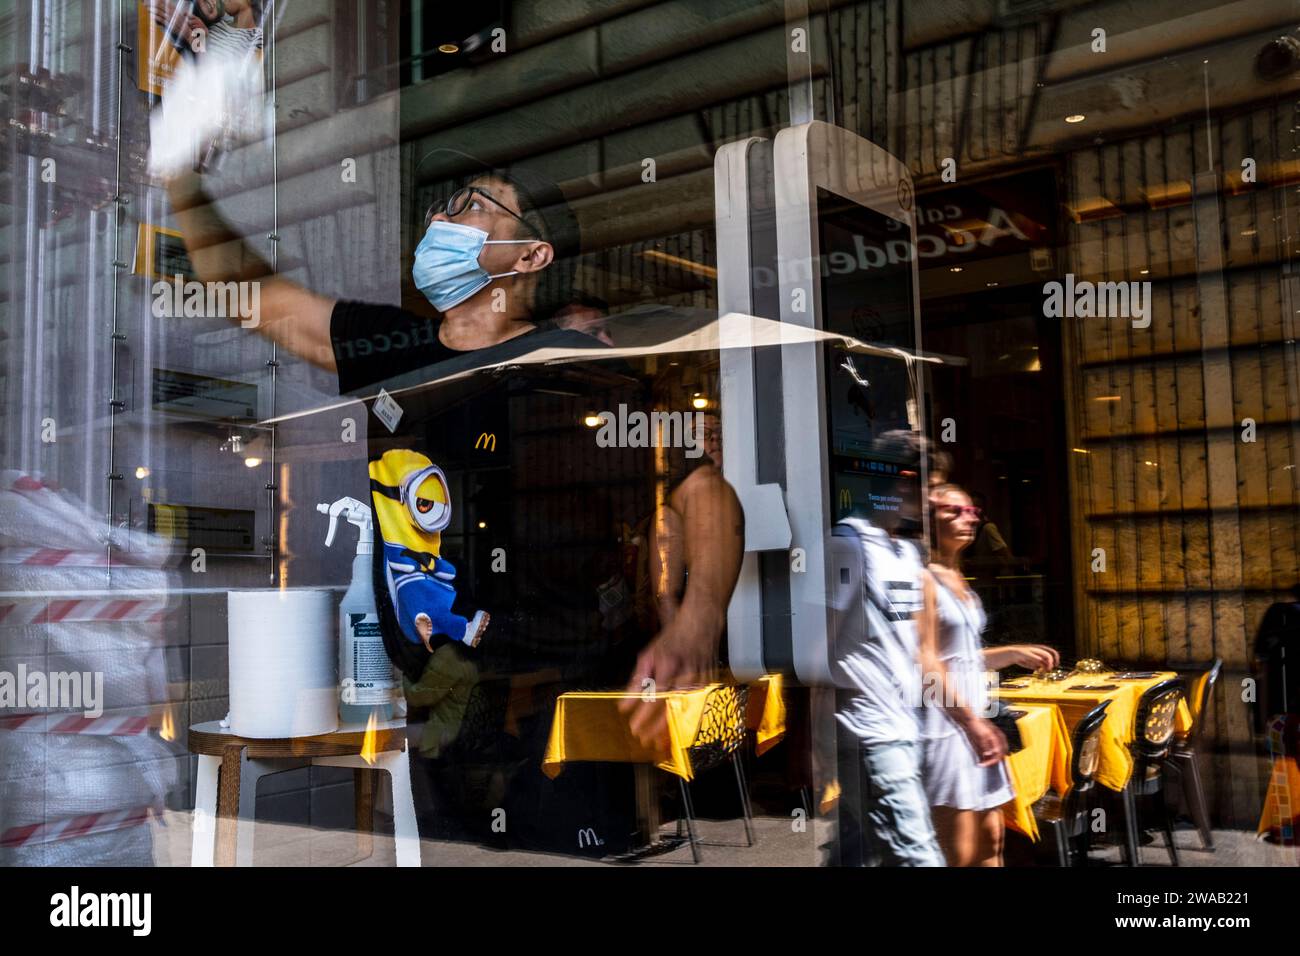 Rome, Italy - 12 August 2022 : Man cleaning a McDonalds window Stock Photo